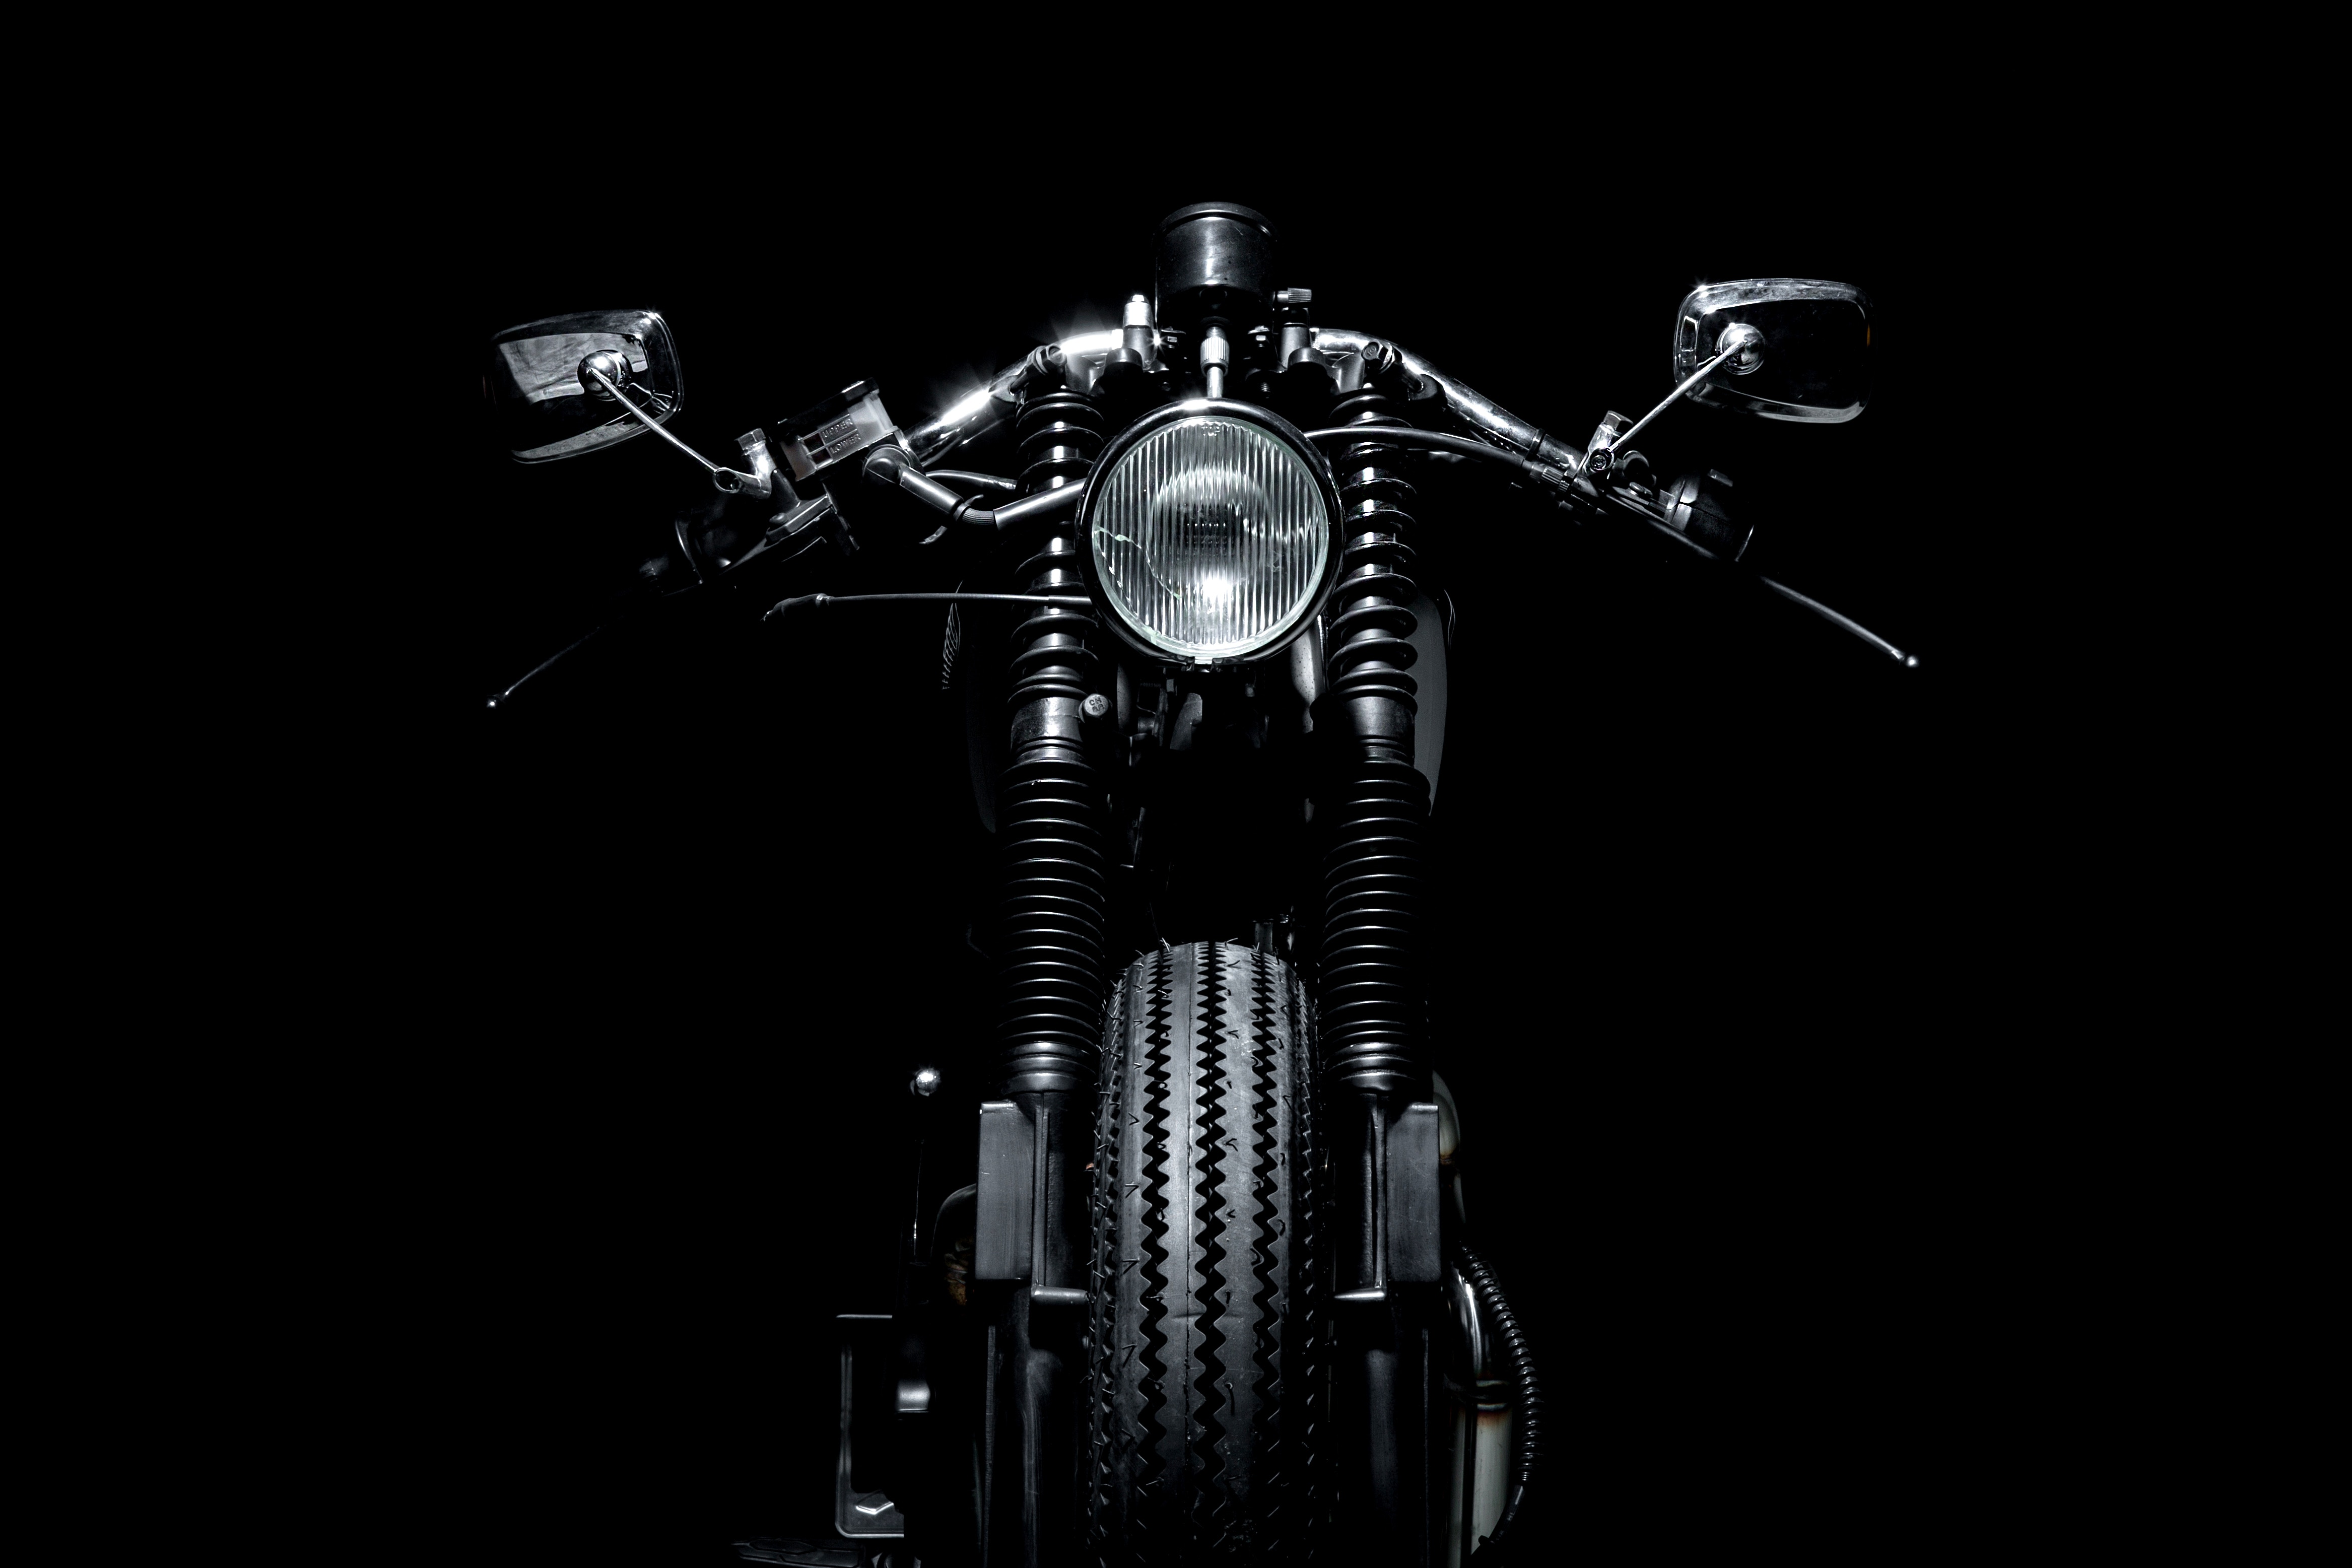 motorcycles, chb, tire, bw, motorcycle, headlight, tyre